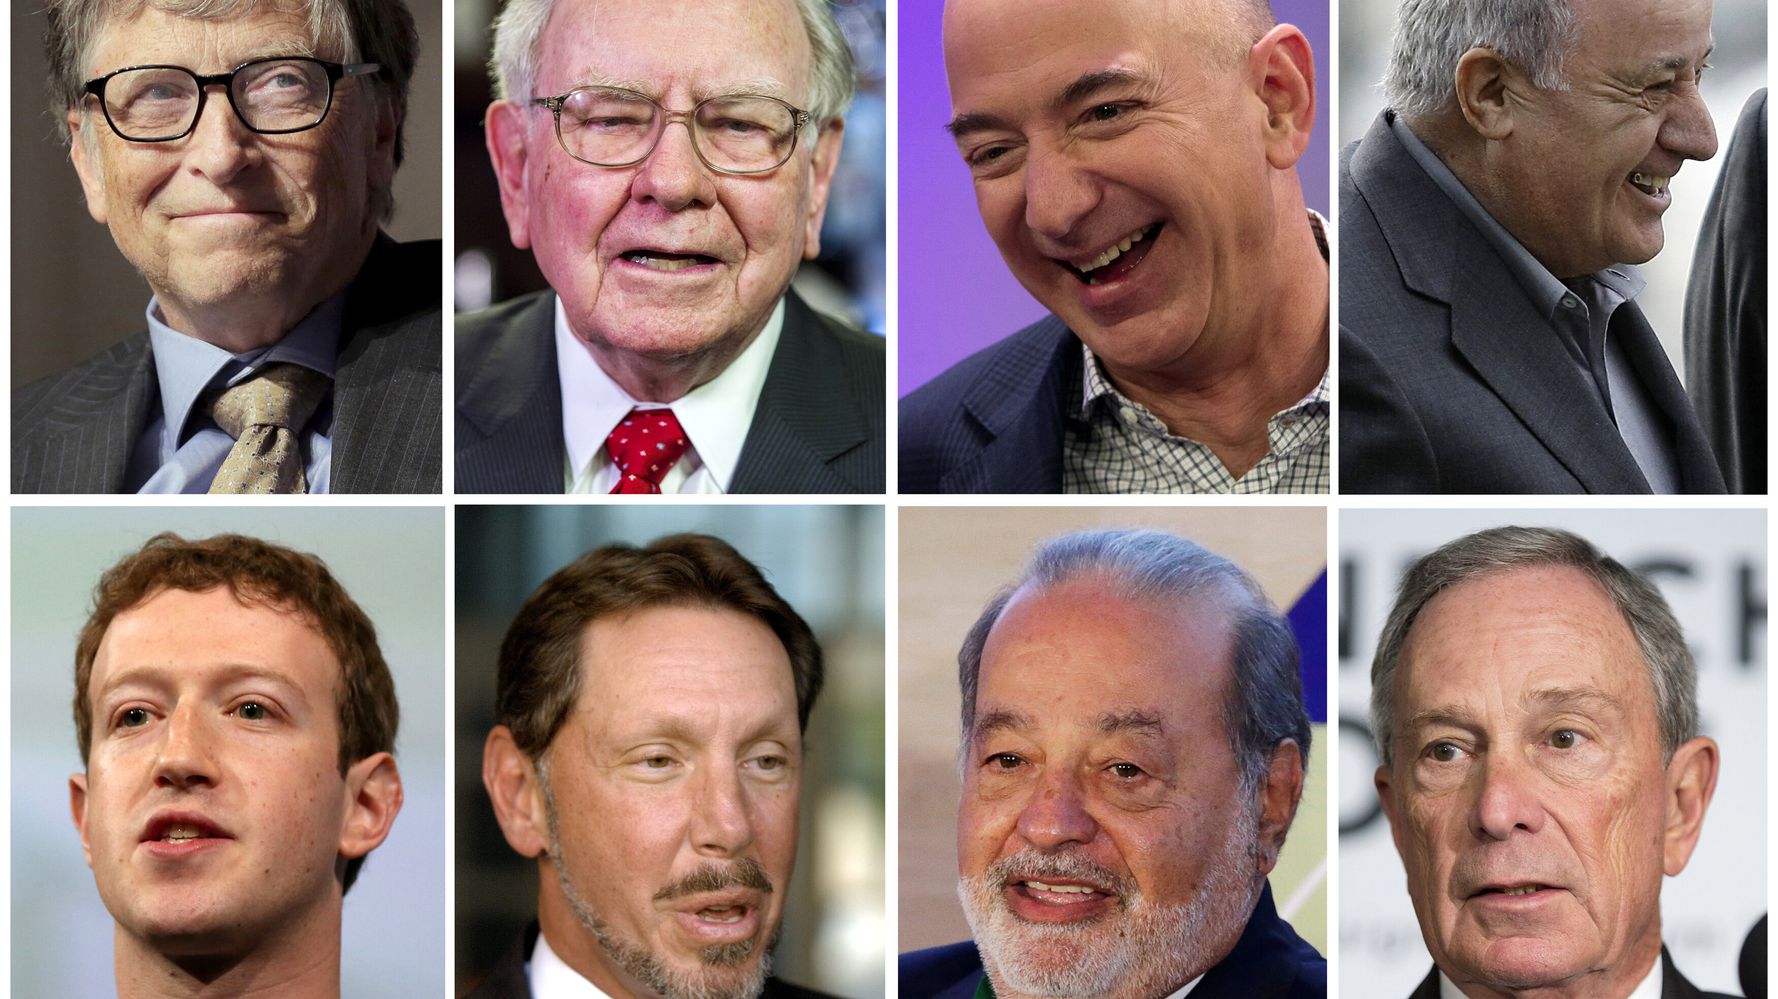 Billionaires: Top first jobs and degrees of world's richest people